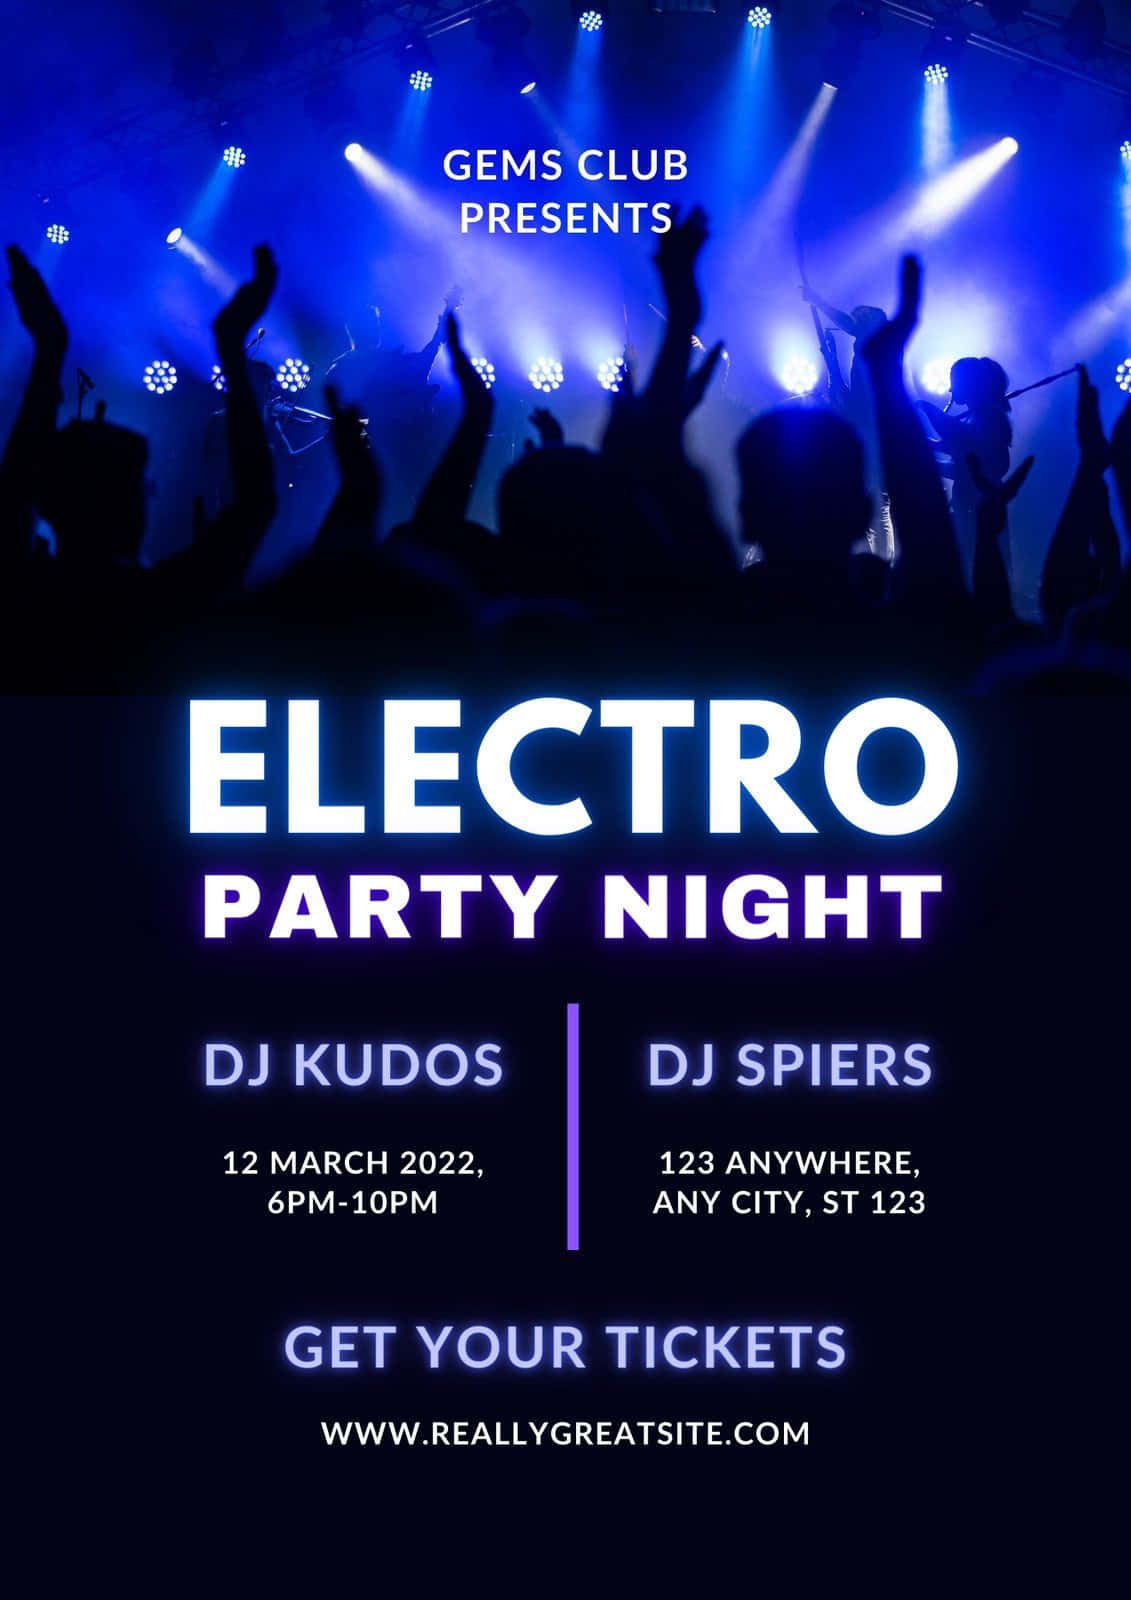 Electro Night Party Flyer Background